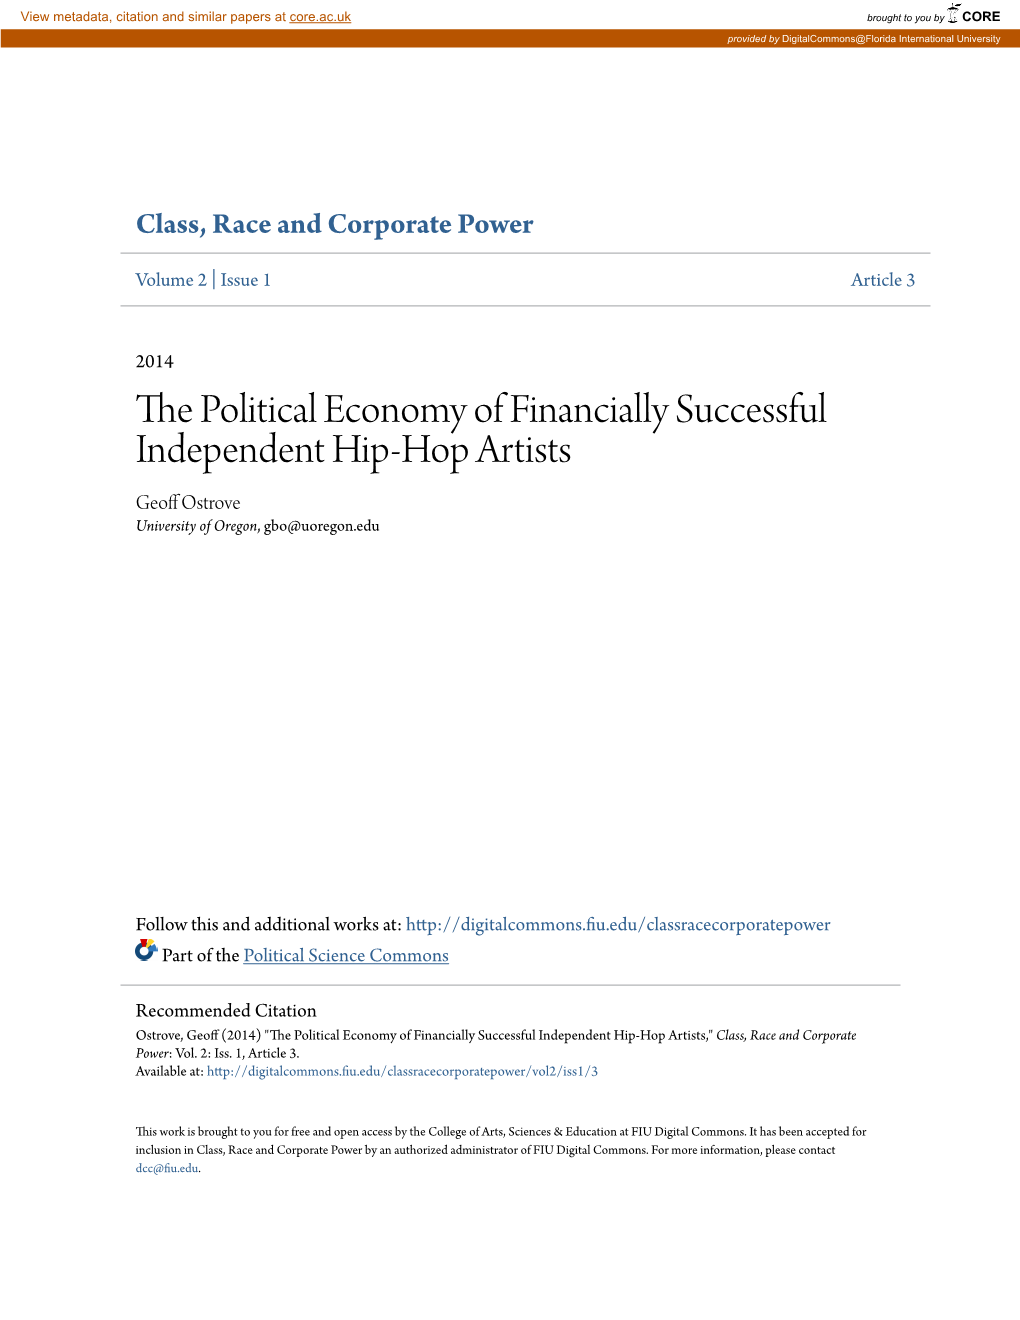 The Political Economy of Financially Successful Independent